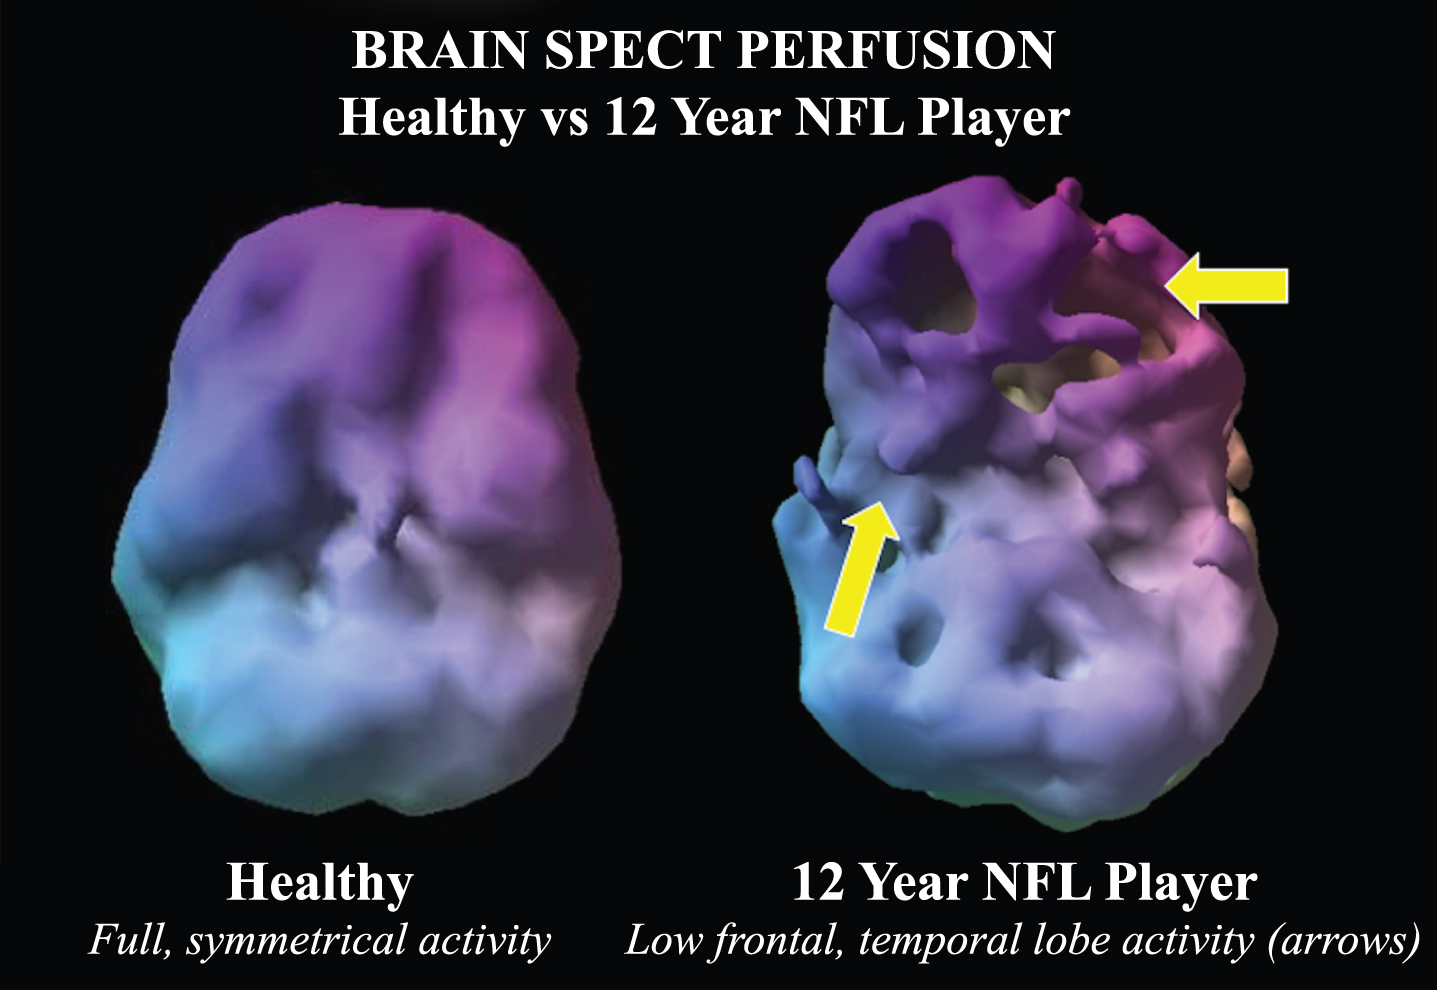 Example of a volume rendered of the undersurface of the brain in normal control compared to a 12-year NFL player. While the control subject has symmetric activity, the NFL player has multiple defects in the inferior frontal and temporal lobes suggestive of concussion related hypoperfusion.